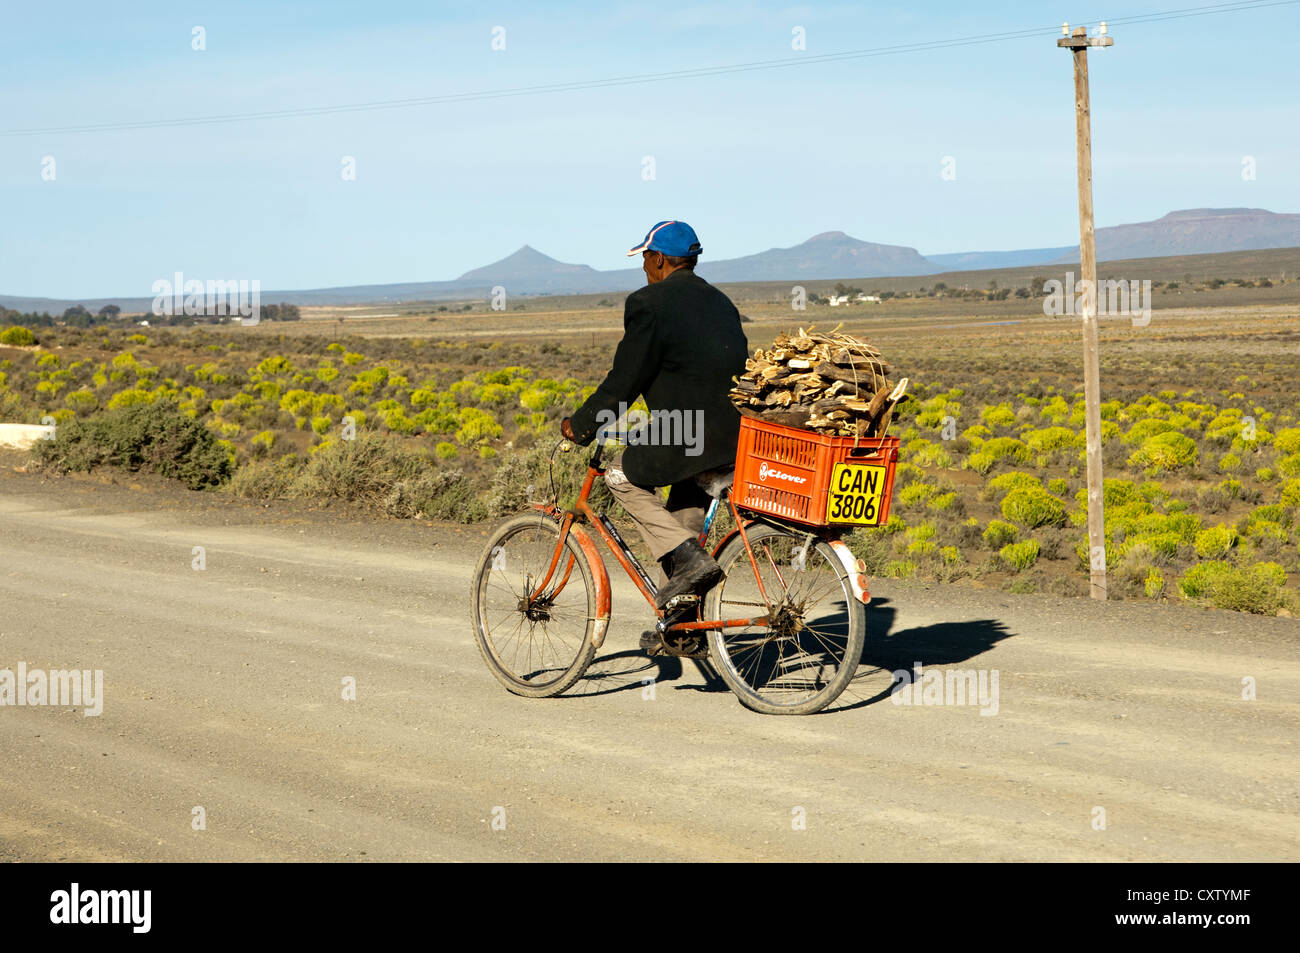 Local man biking on a country road to Calvinia with a box of firewood on the luggage carrier, Calvinia, South Africa Stock Photo